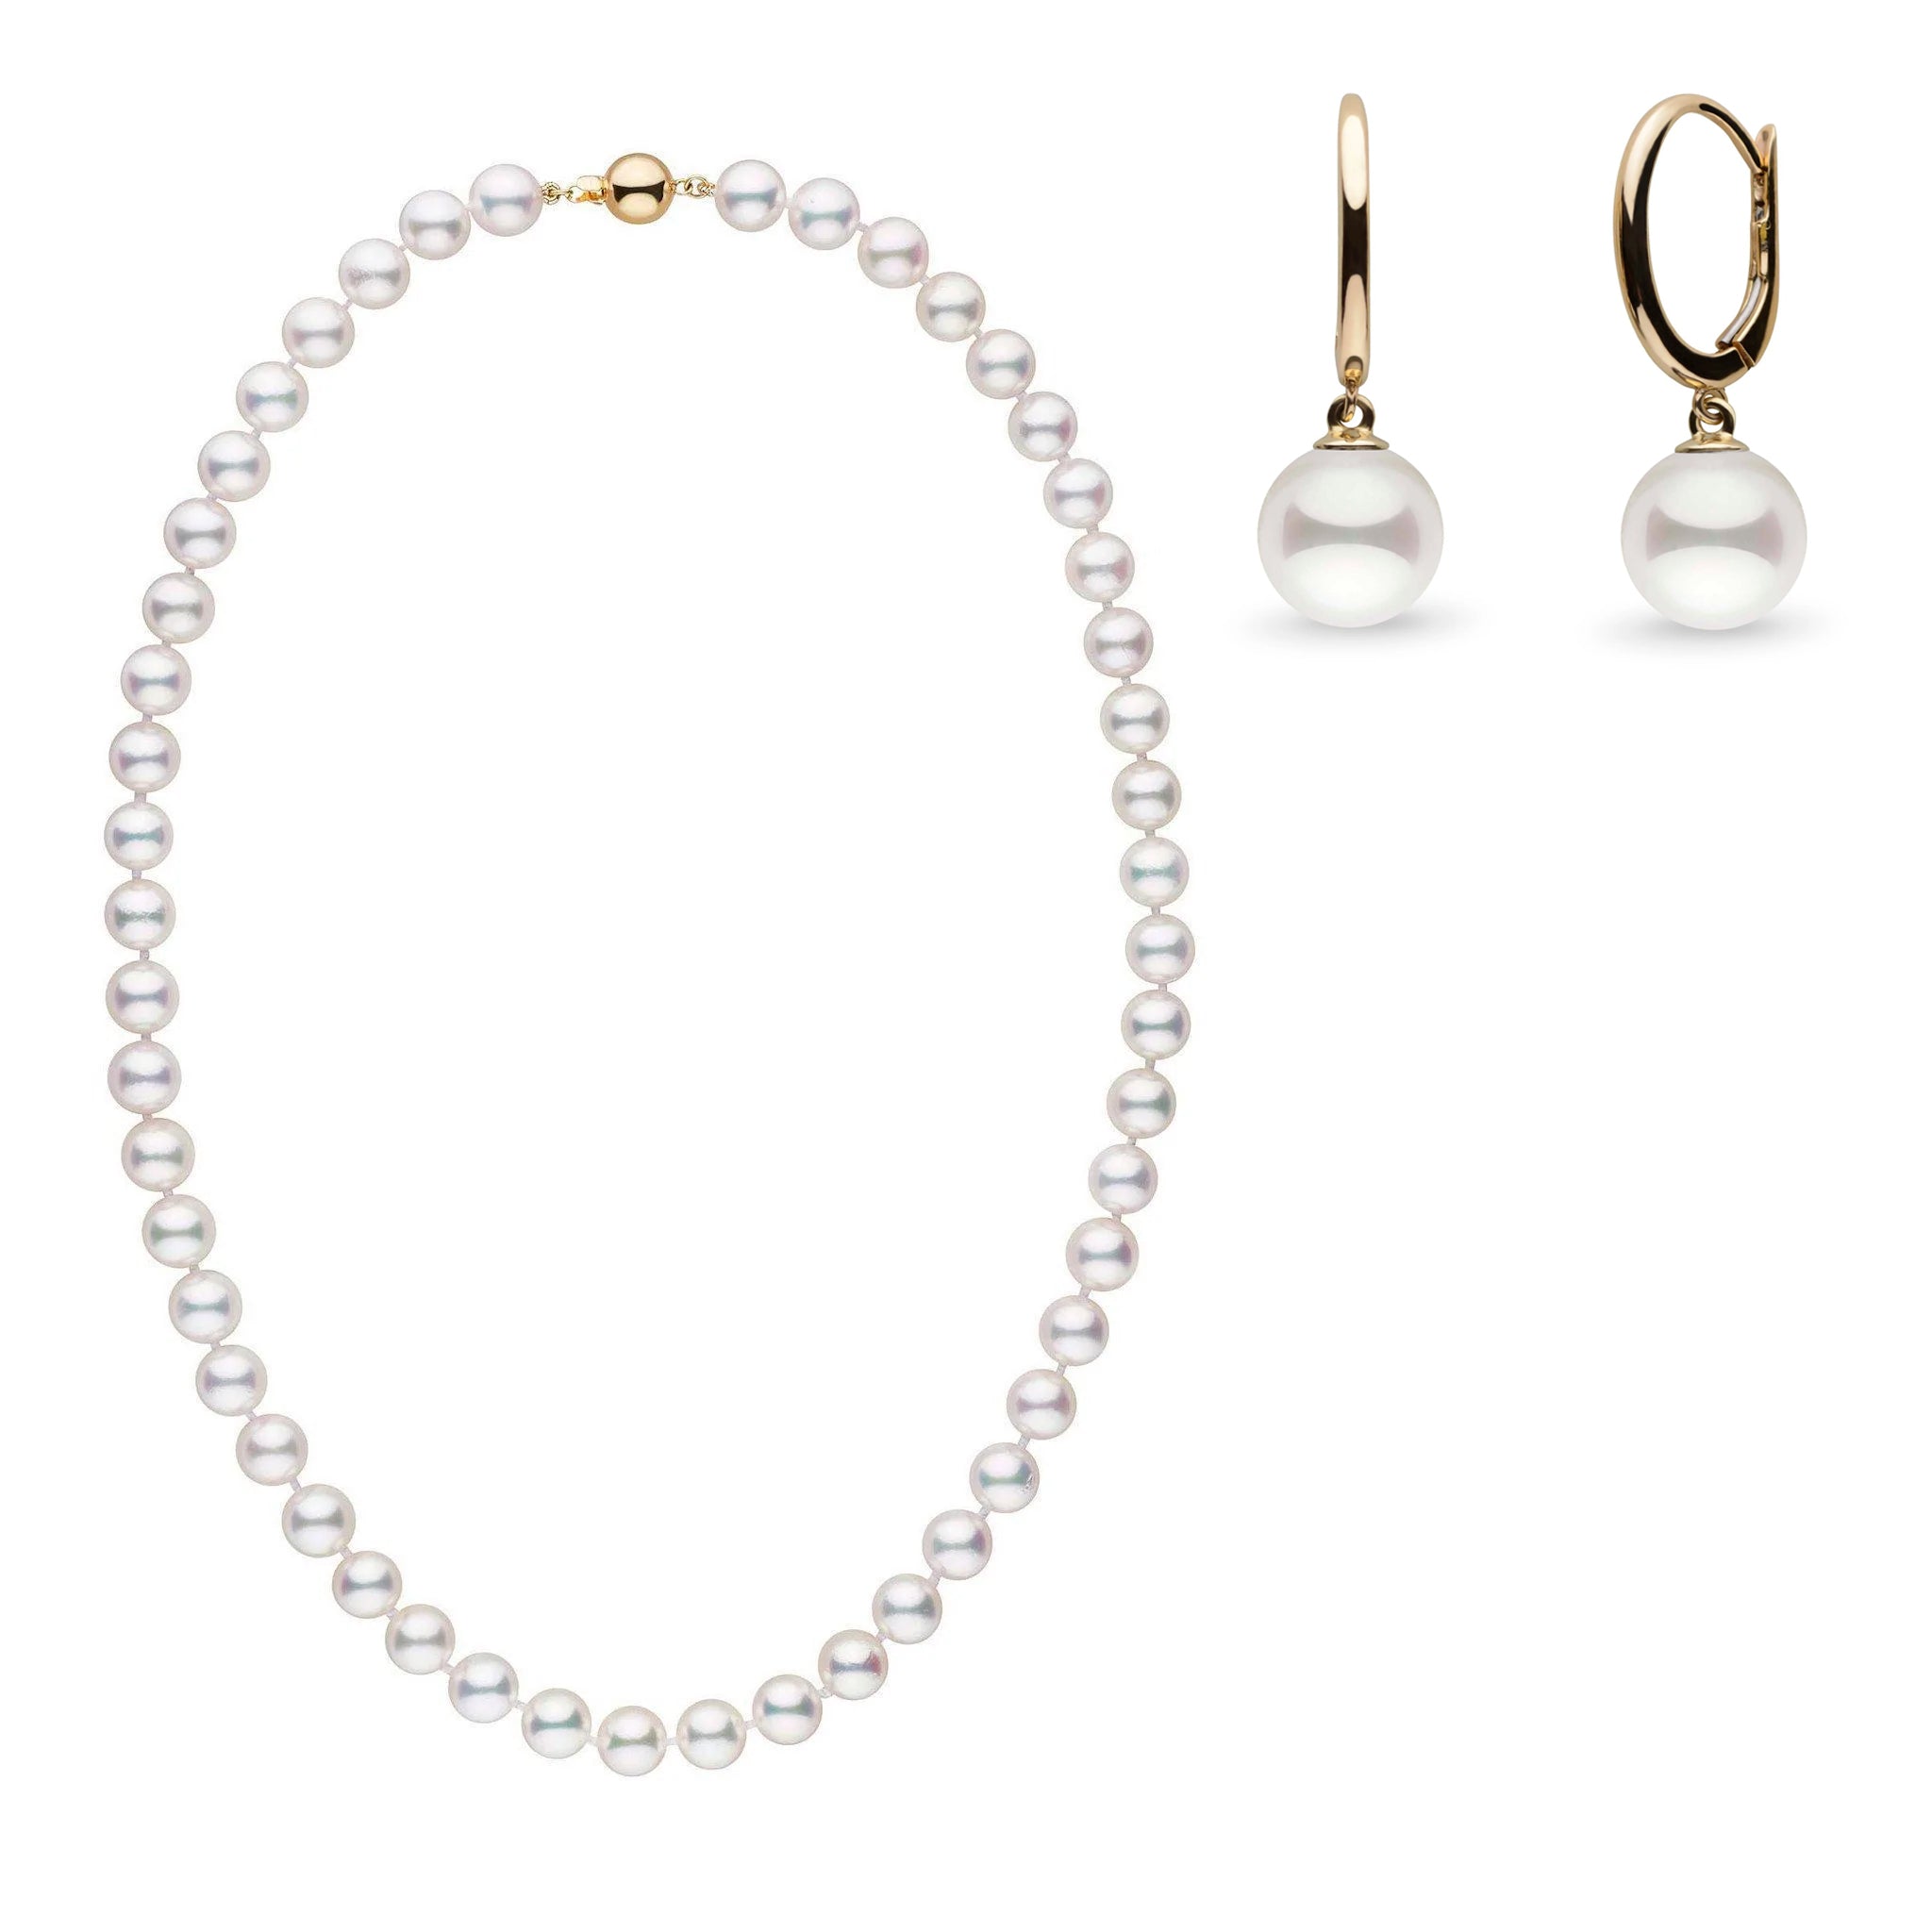 7.0-7.5 mm AAA Akoya 18 Inch Pearl Necklace with Dangle Earrings Yellow Gold